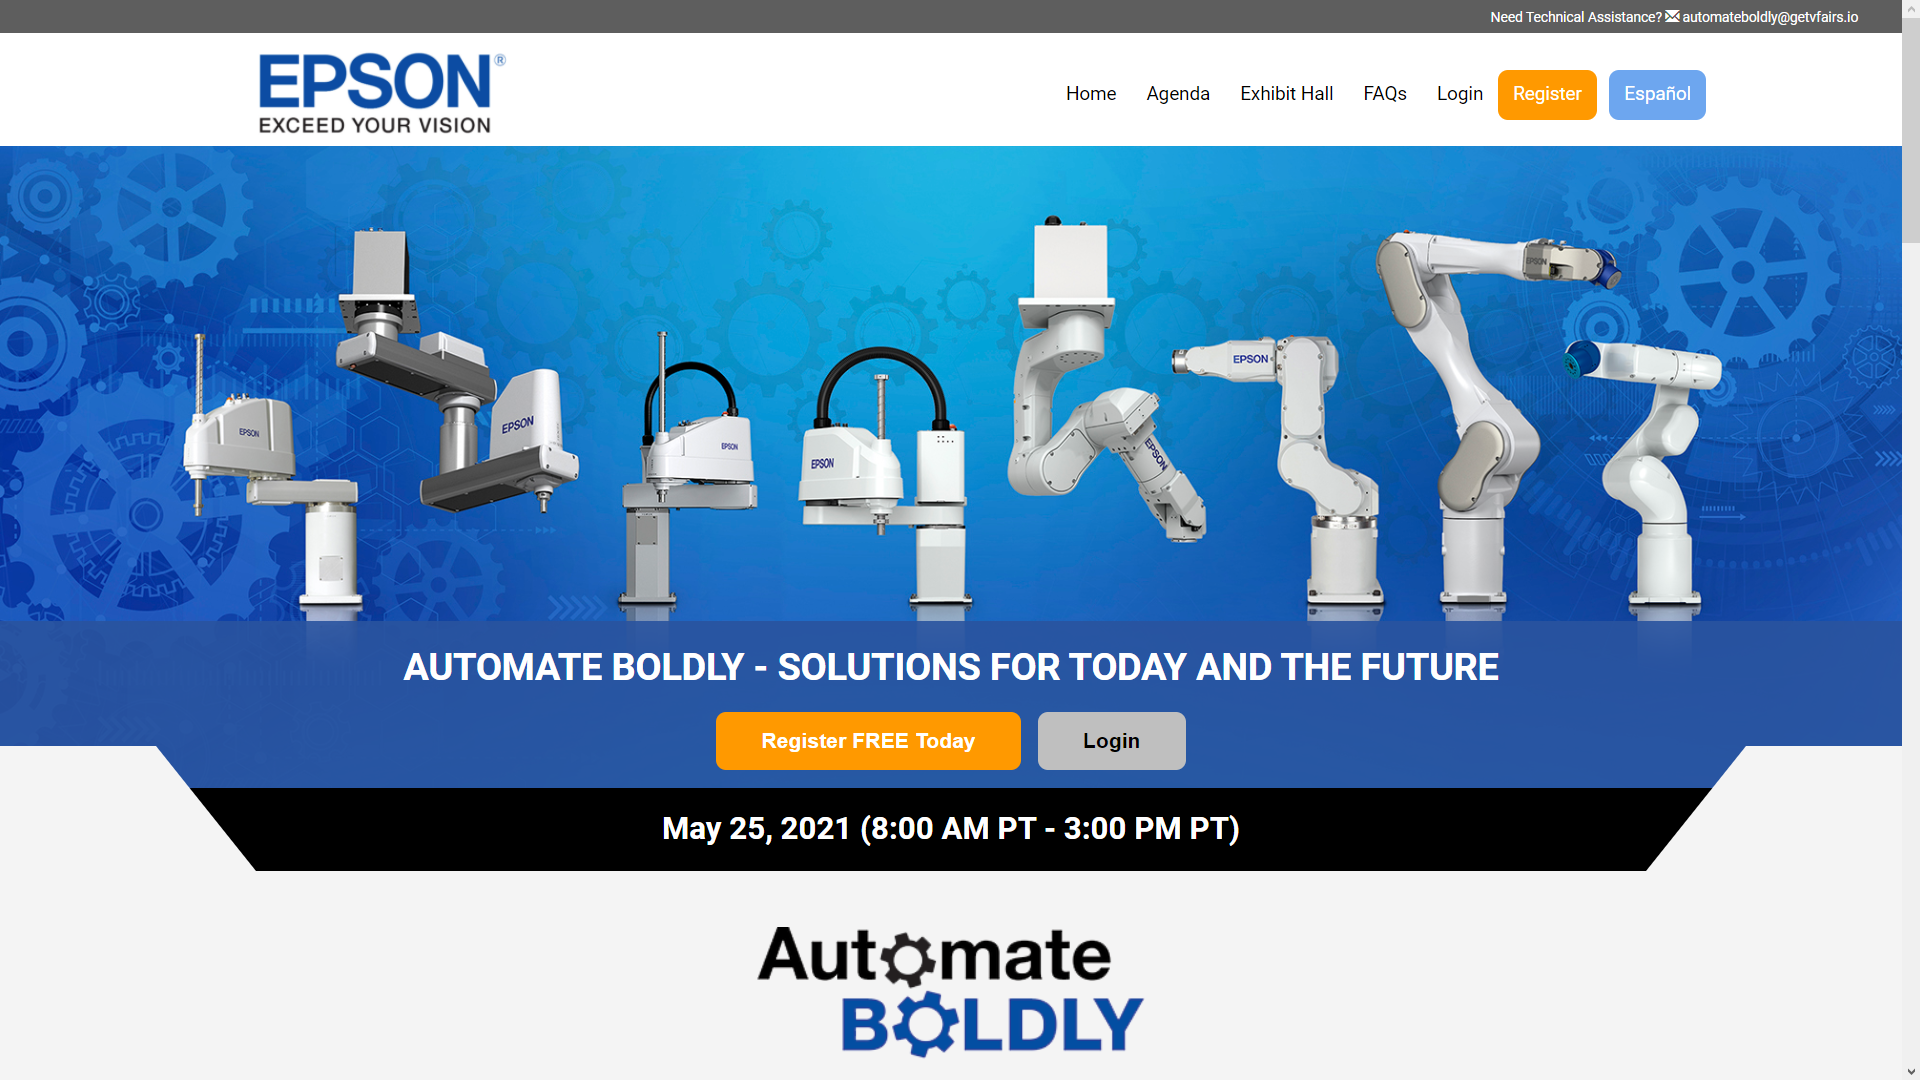 Automate Boldly